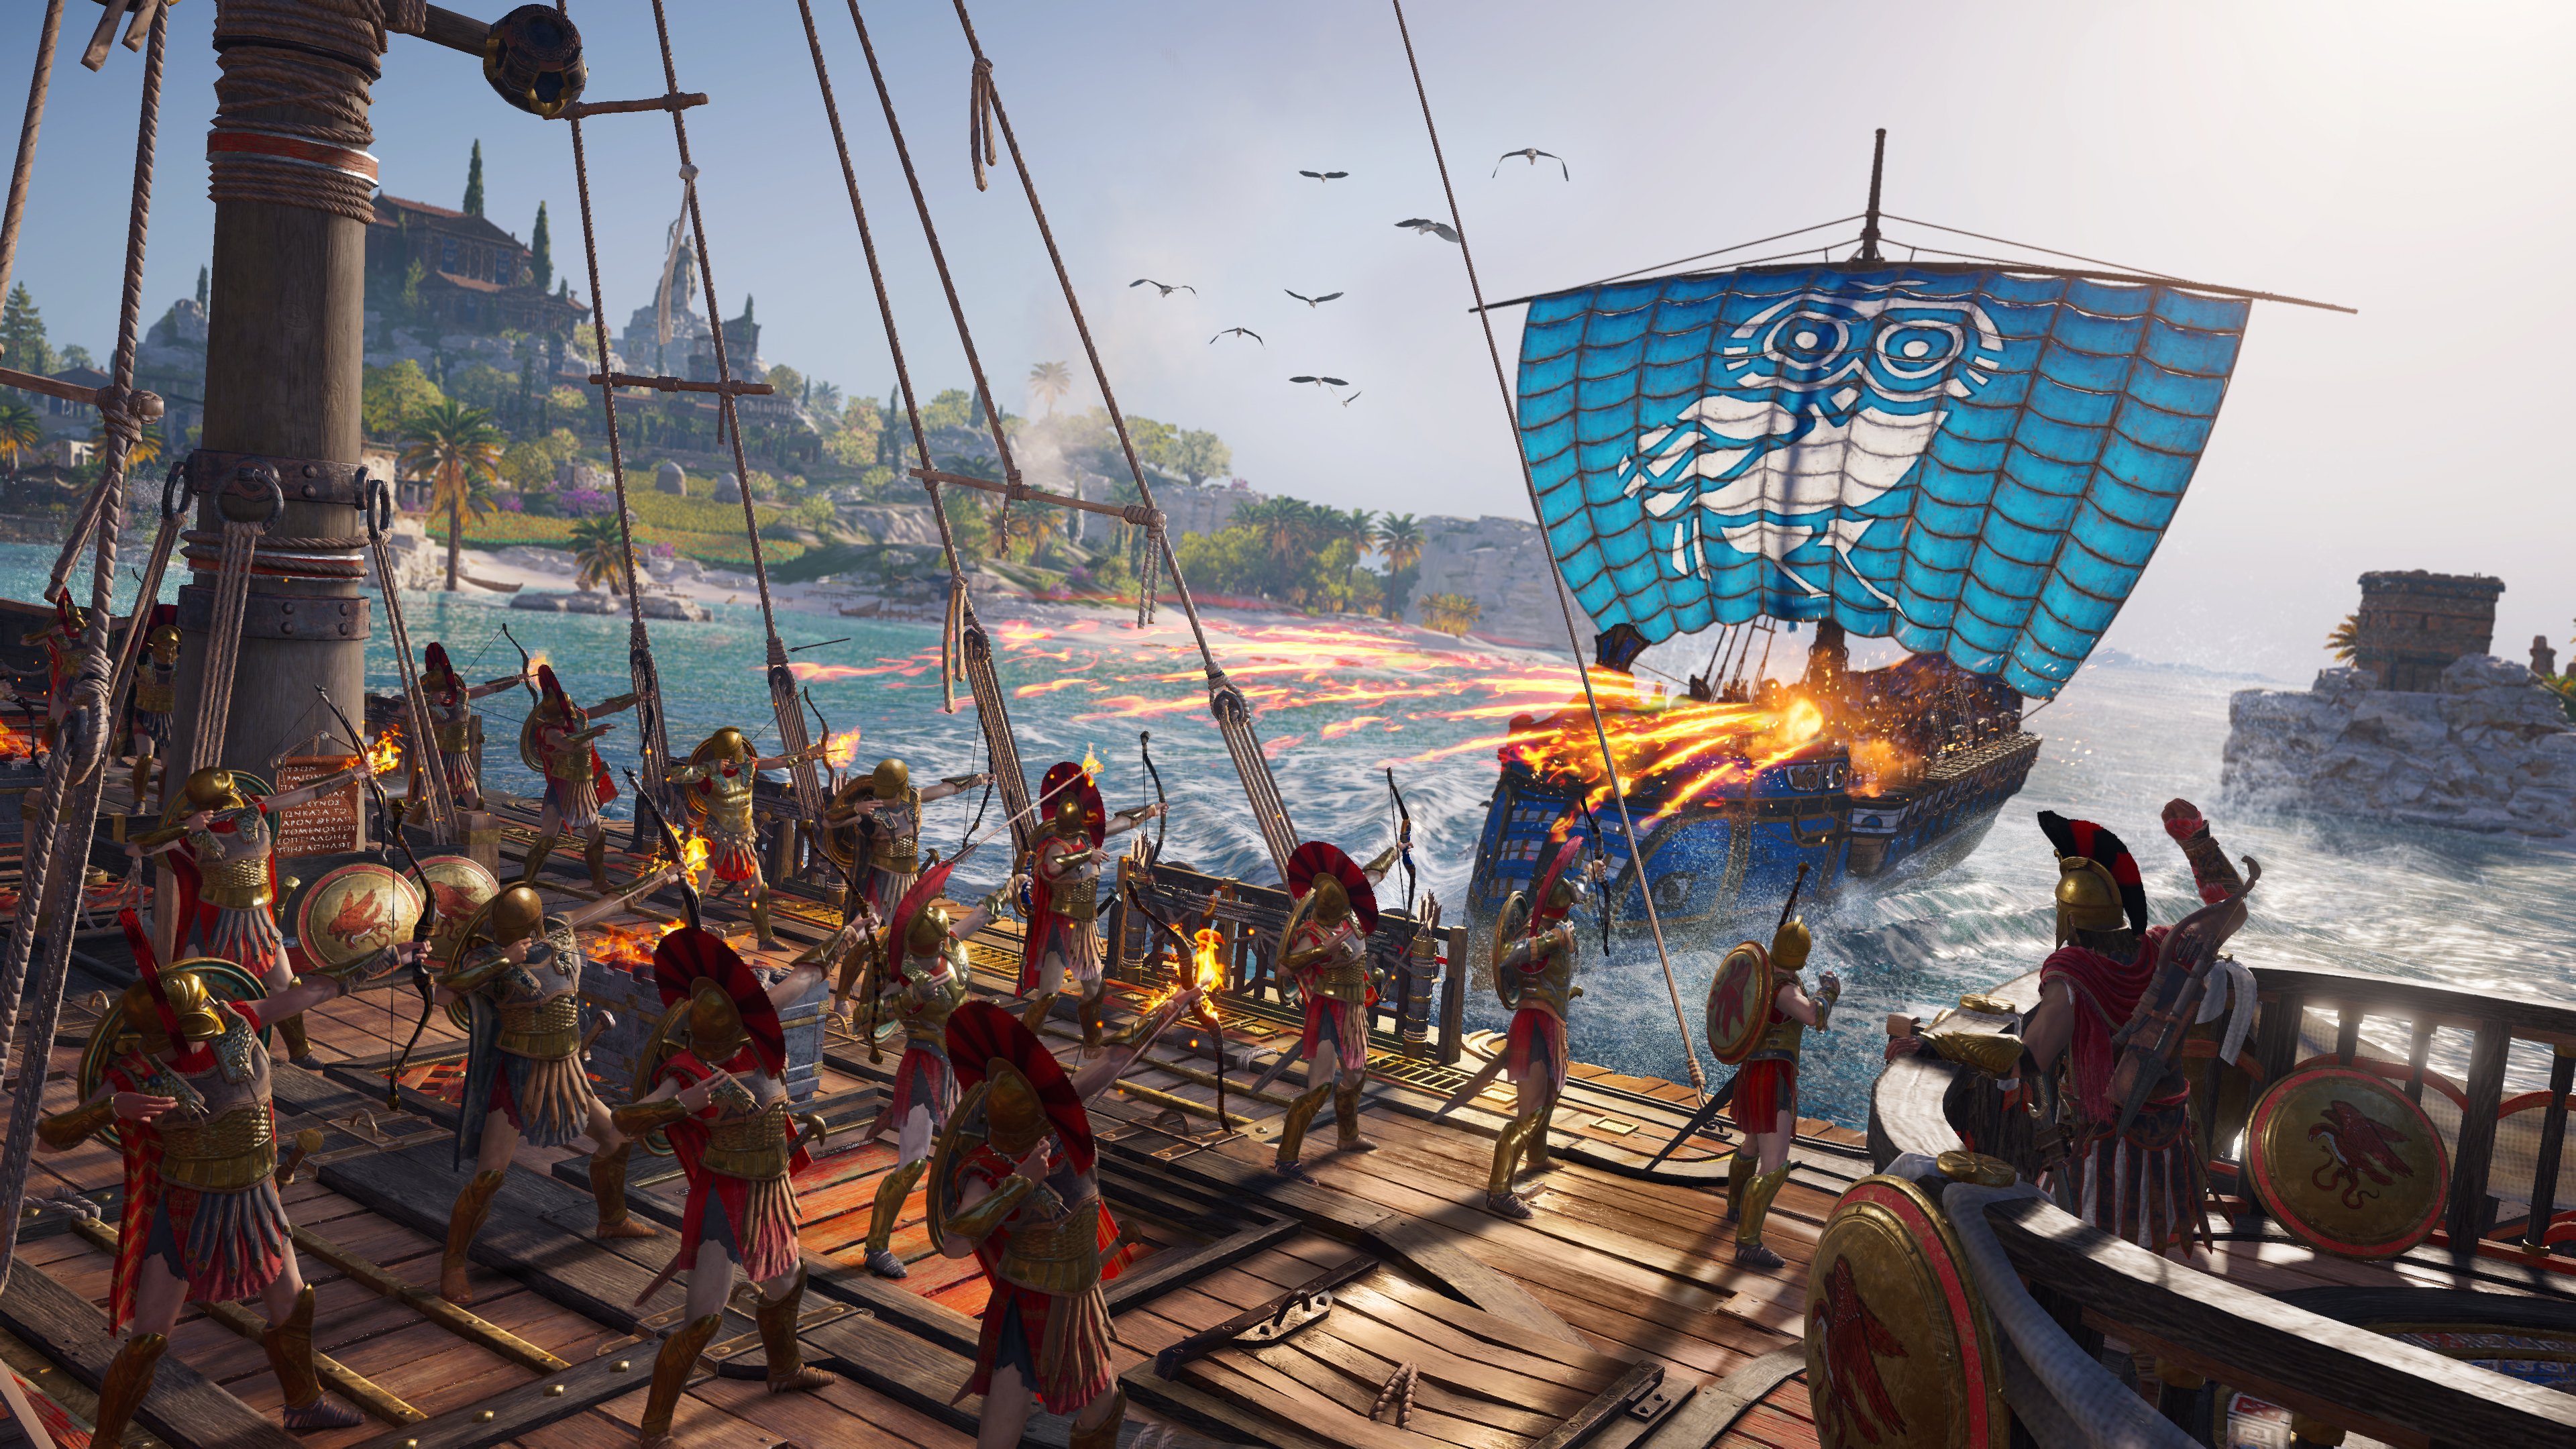 assassin's creed odyssey, video game, archer, ship, spartan, assassin's creed